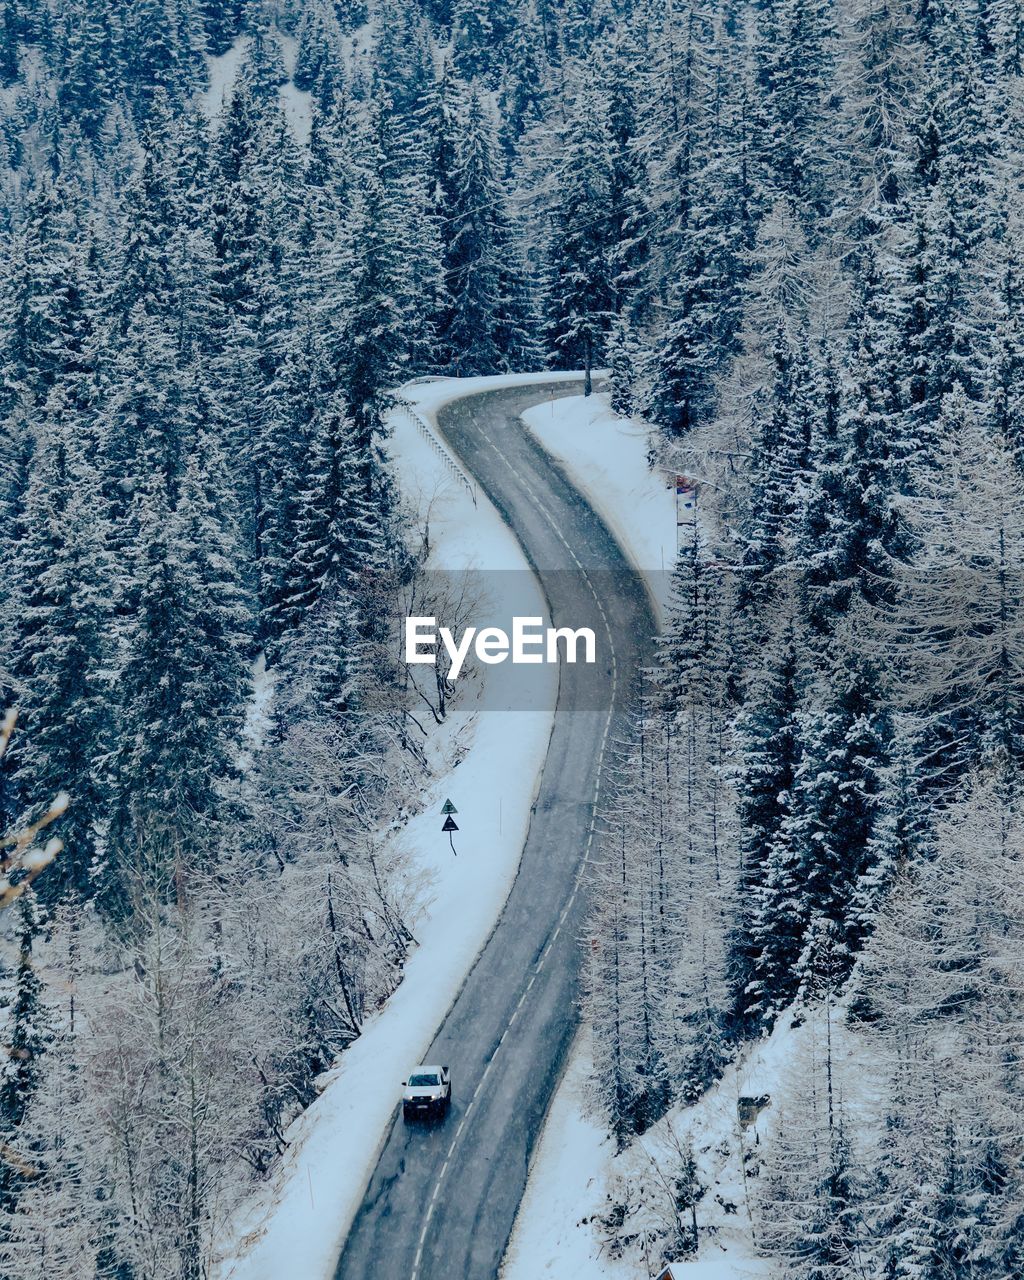 HIGH ANGLE VIEW OF SNOW COVERED ROAD AMIDST TREES